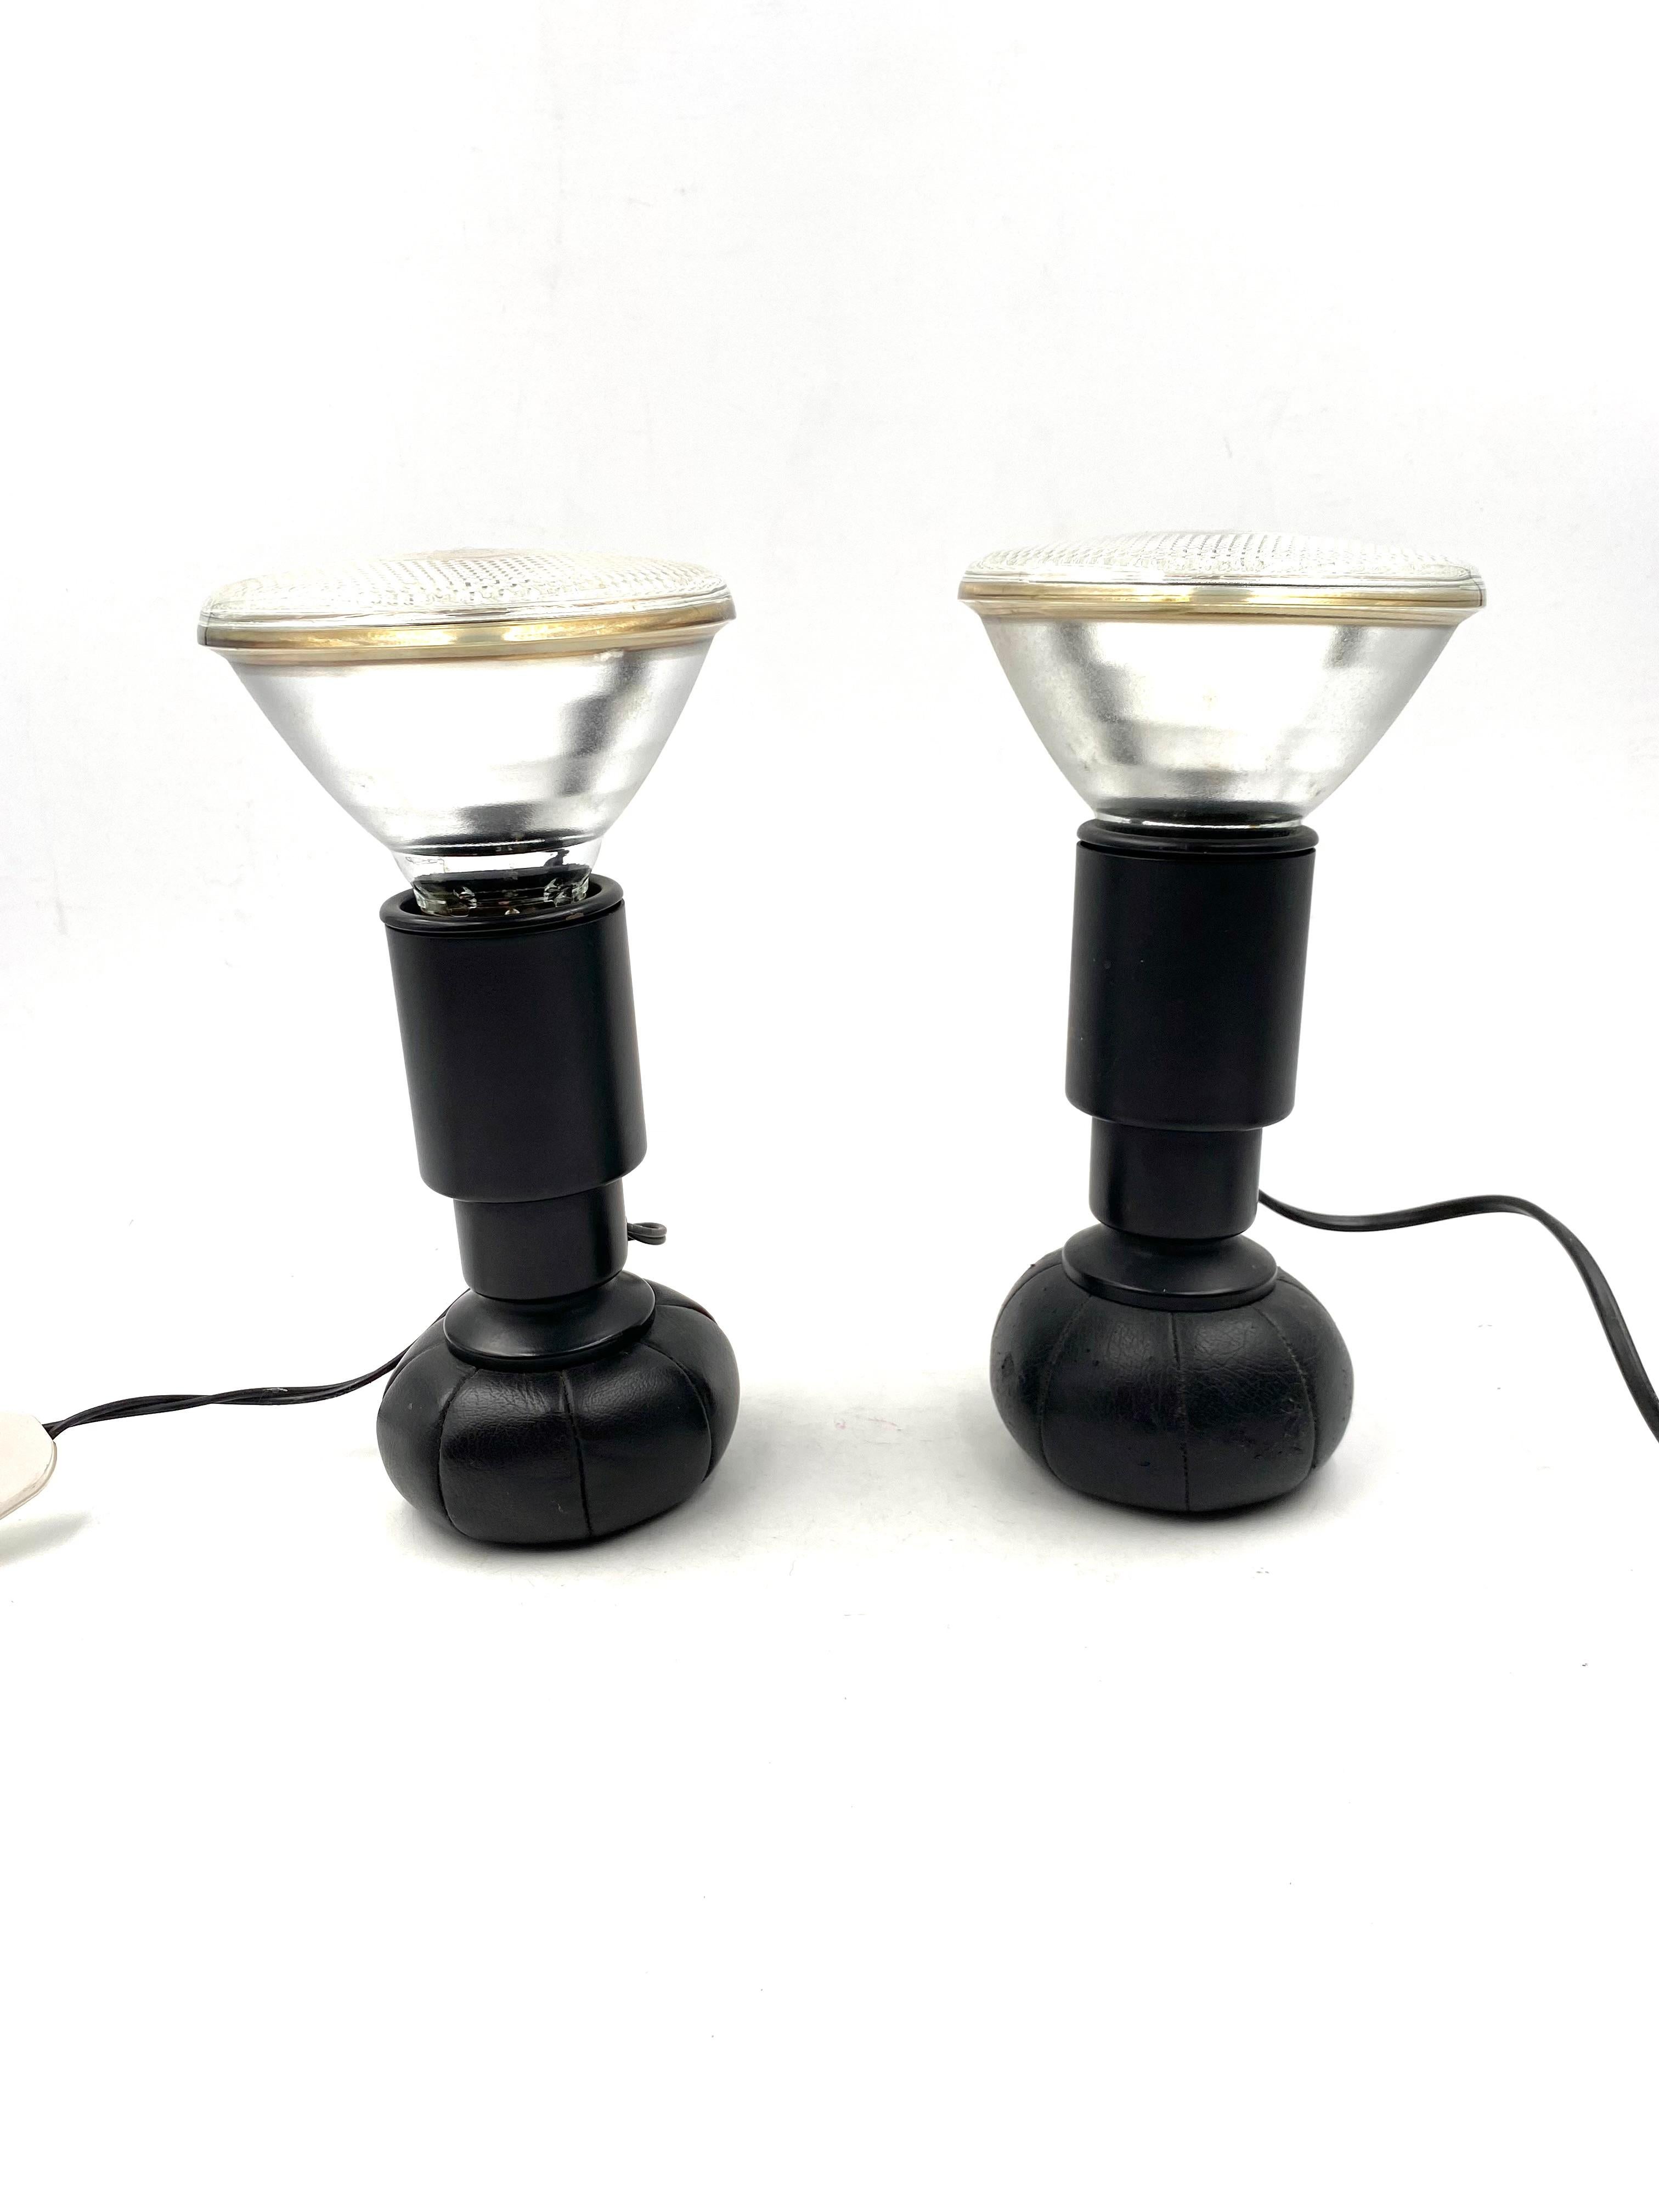 Space Age Gino Sarfatti, Set of 2 Table Lamps mod. 600/C, Arteluce Italy, 1966 For Sale